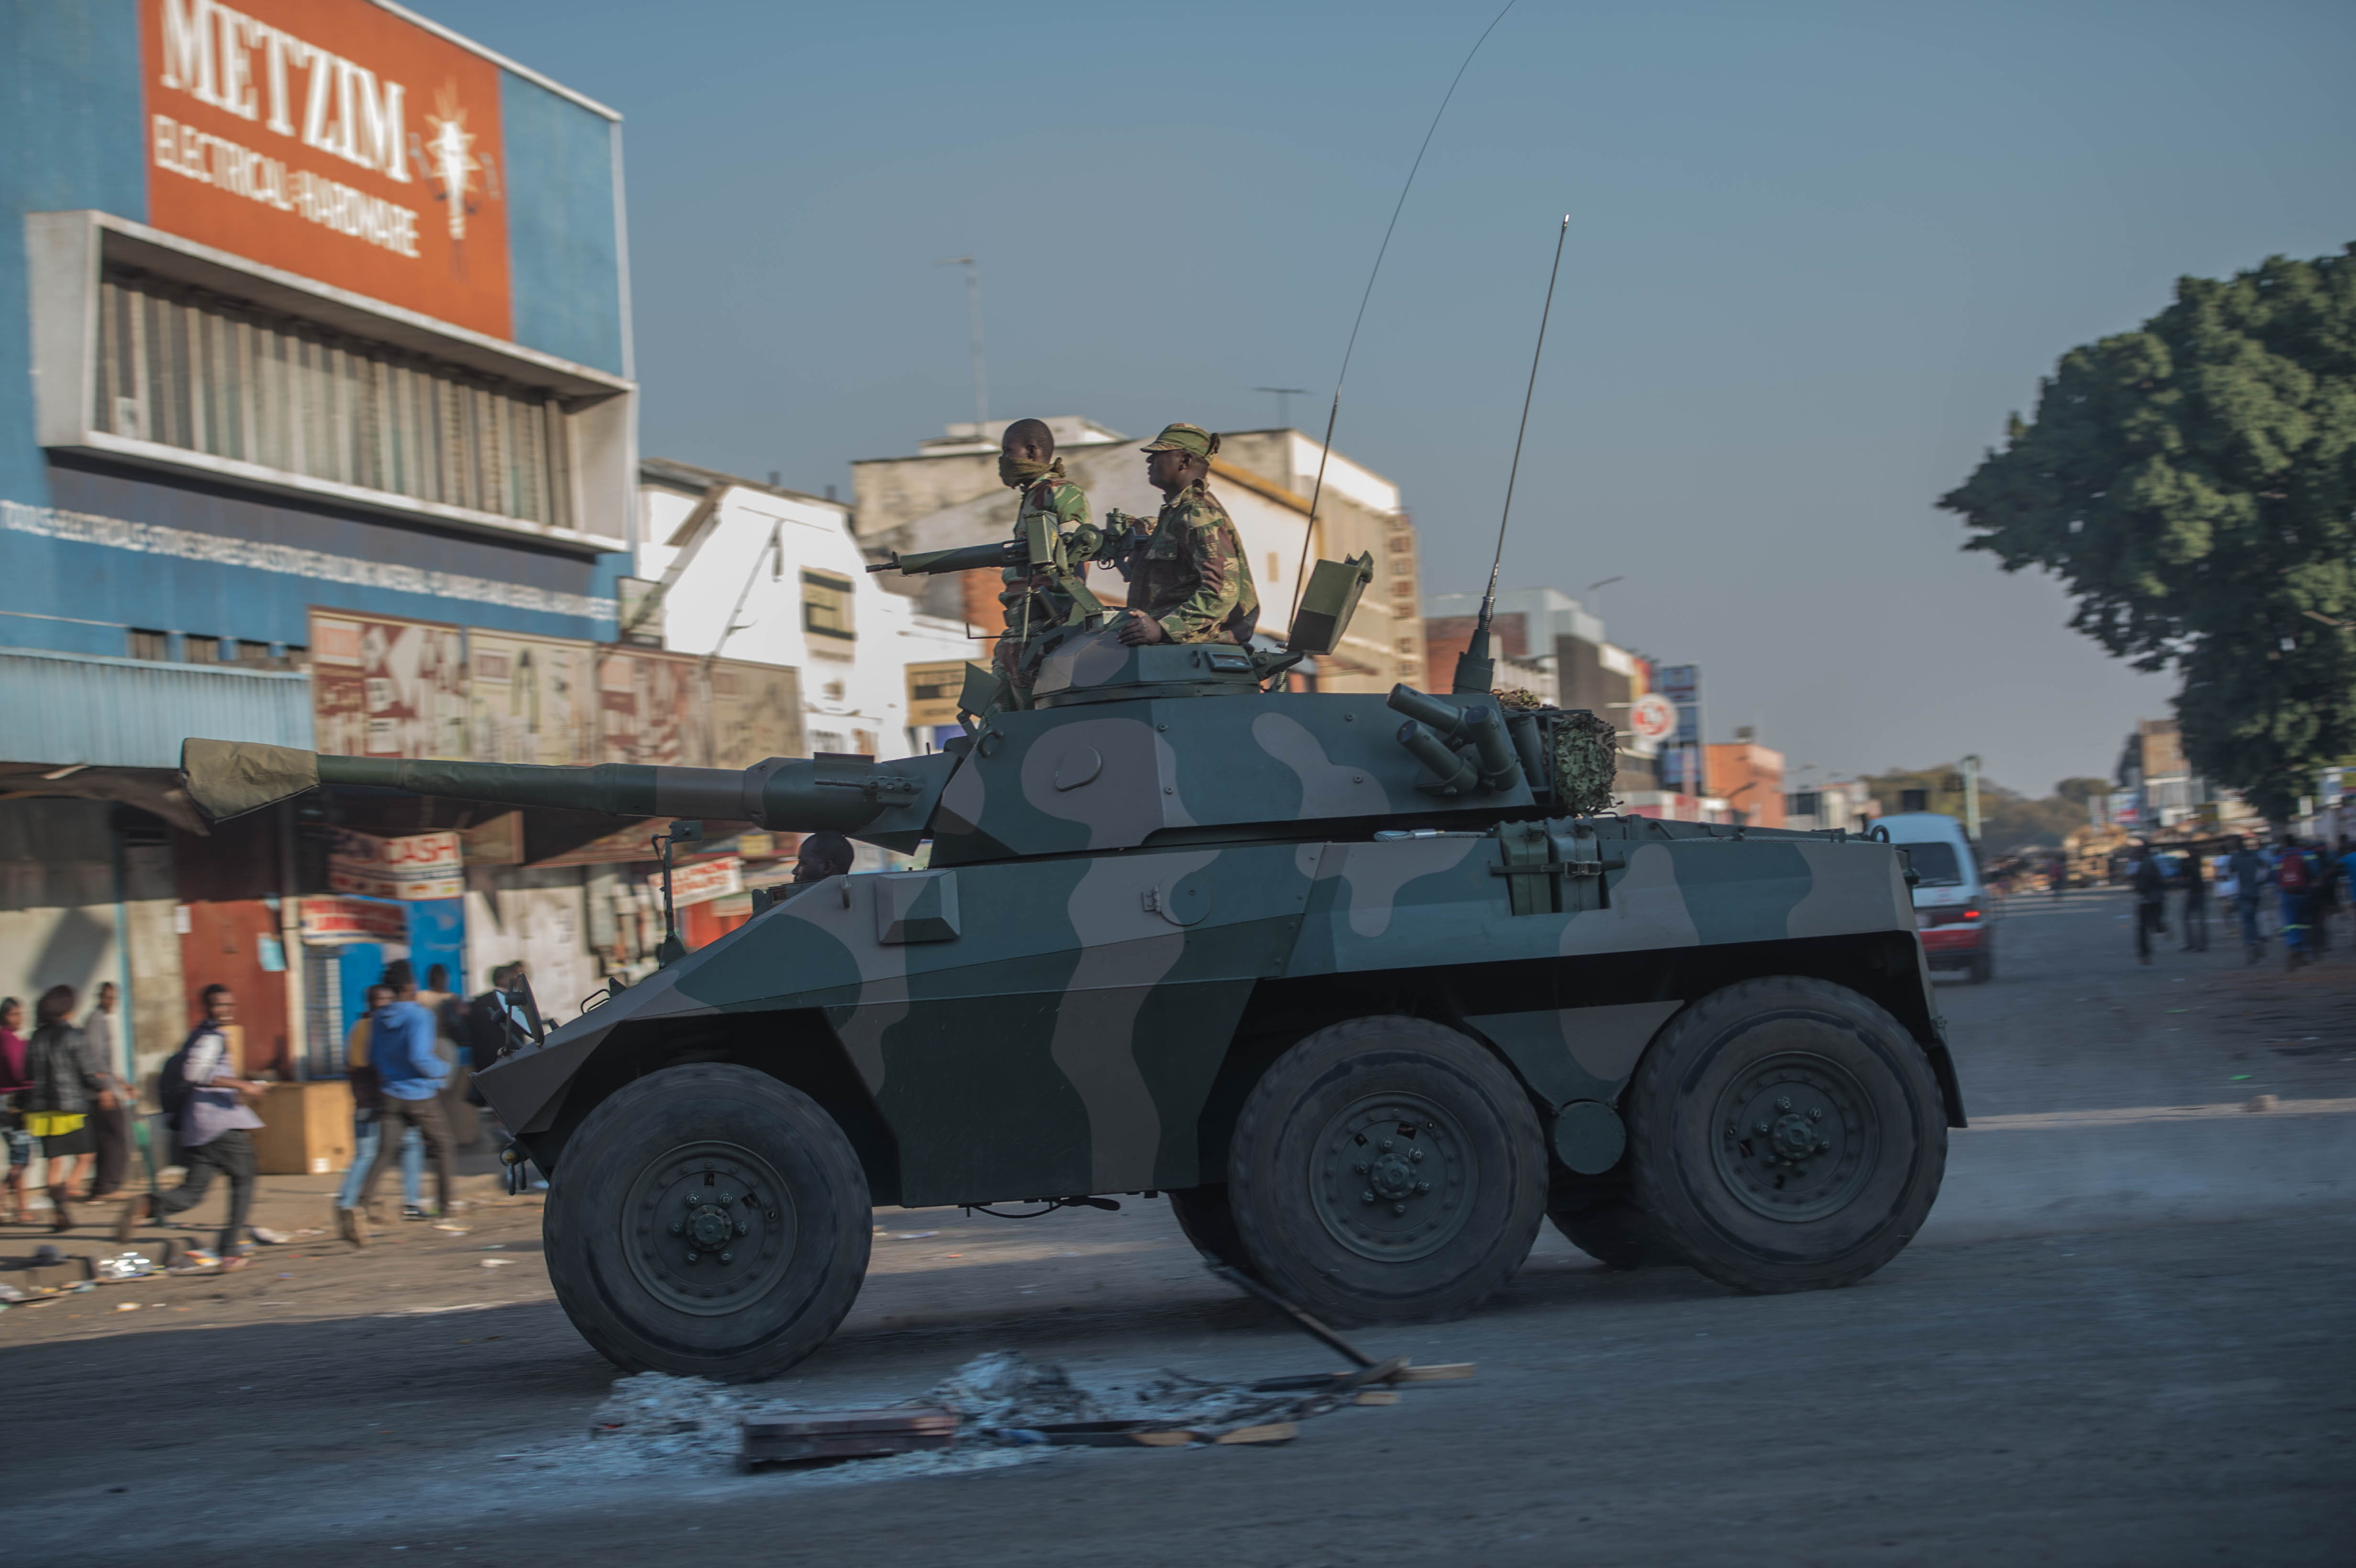 Photo of unrest during Zimbabwean elections